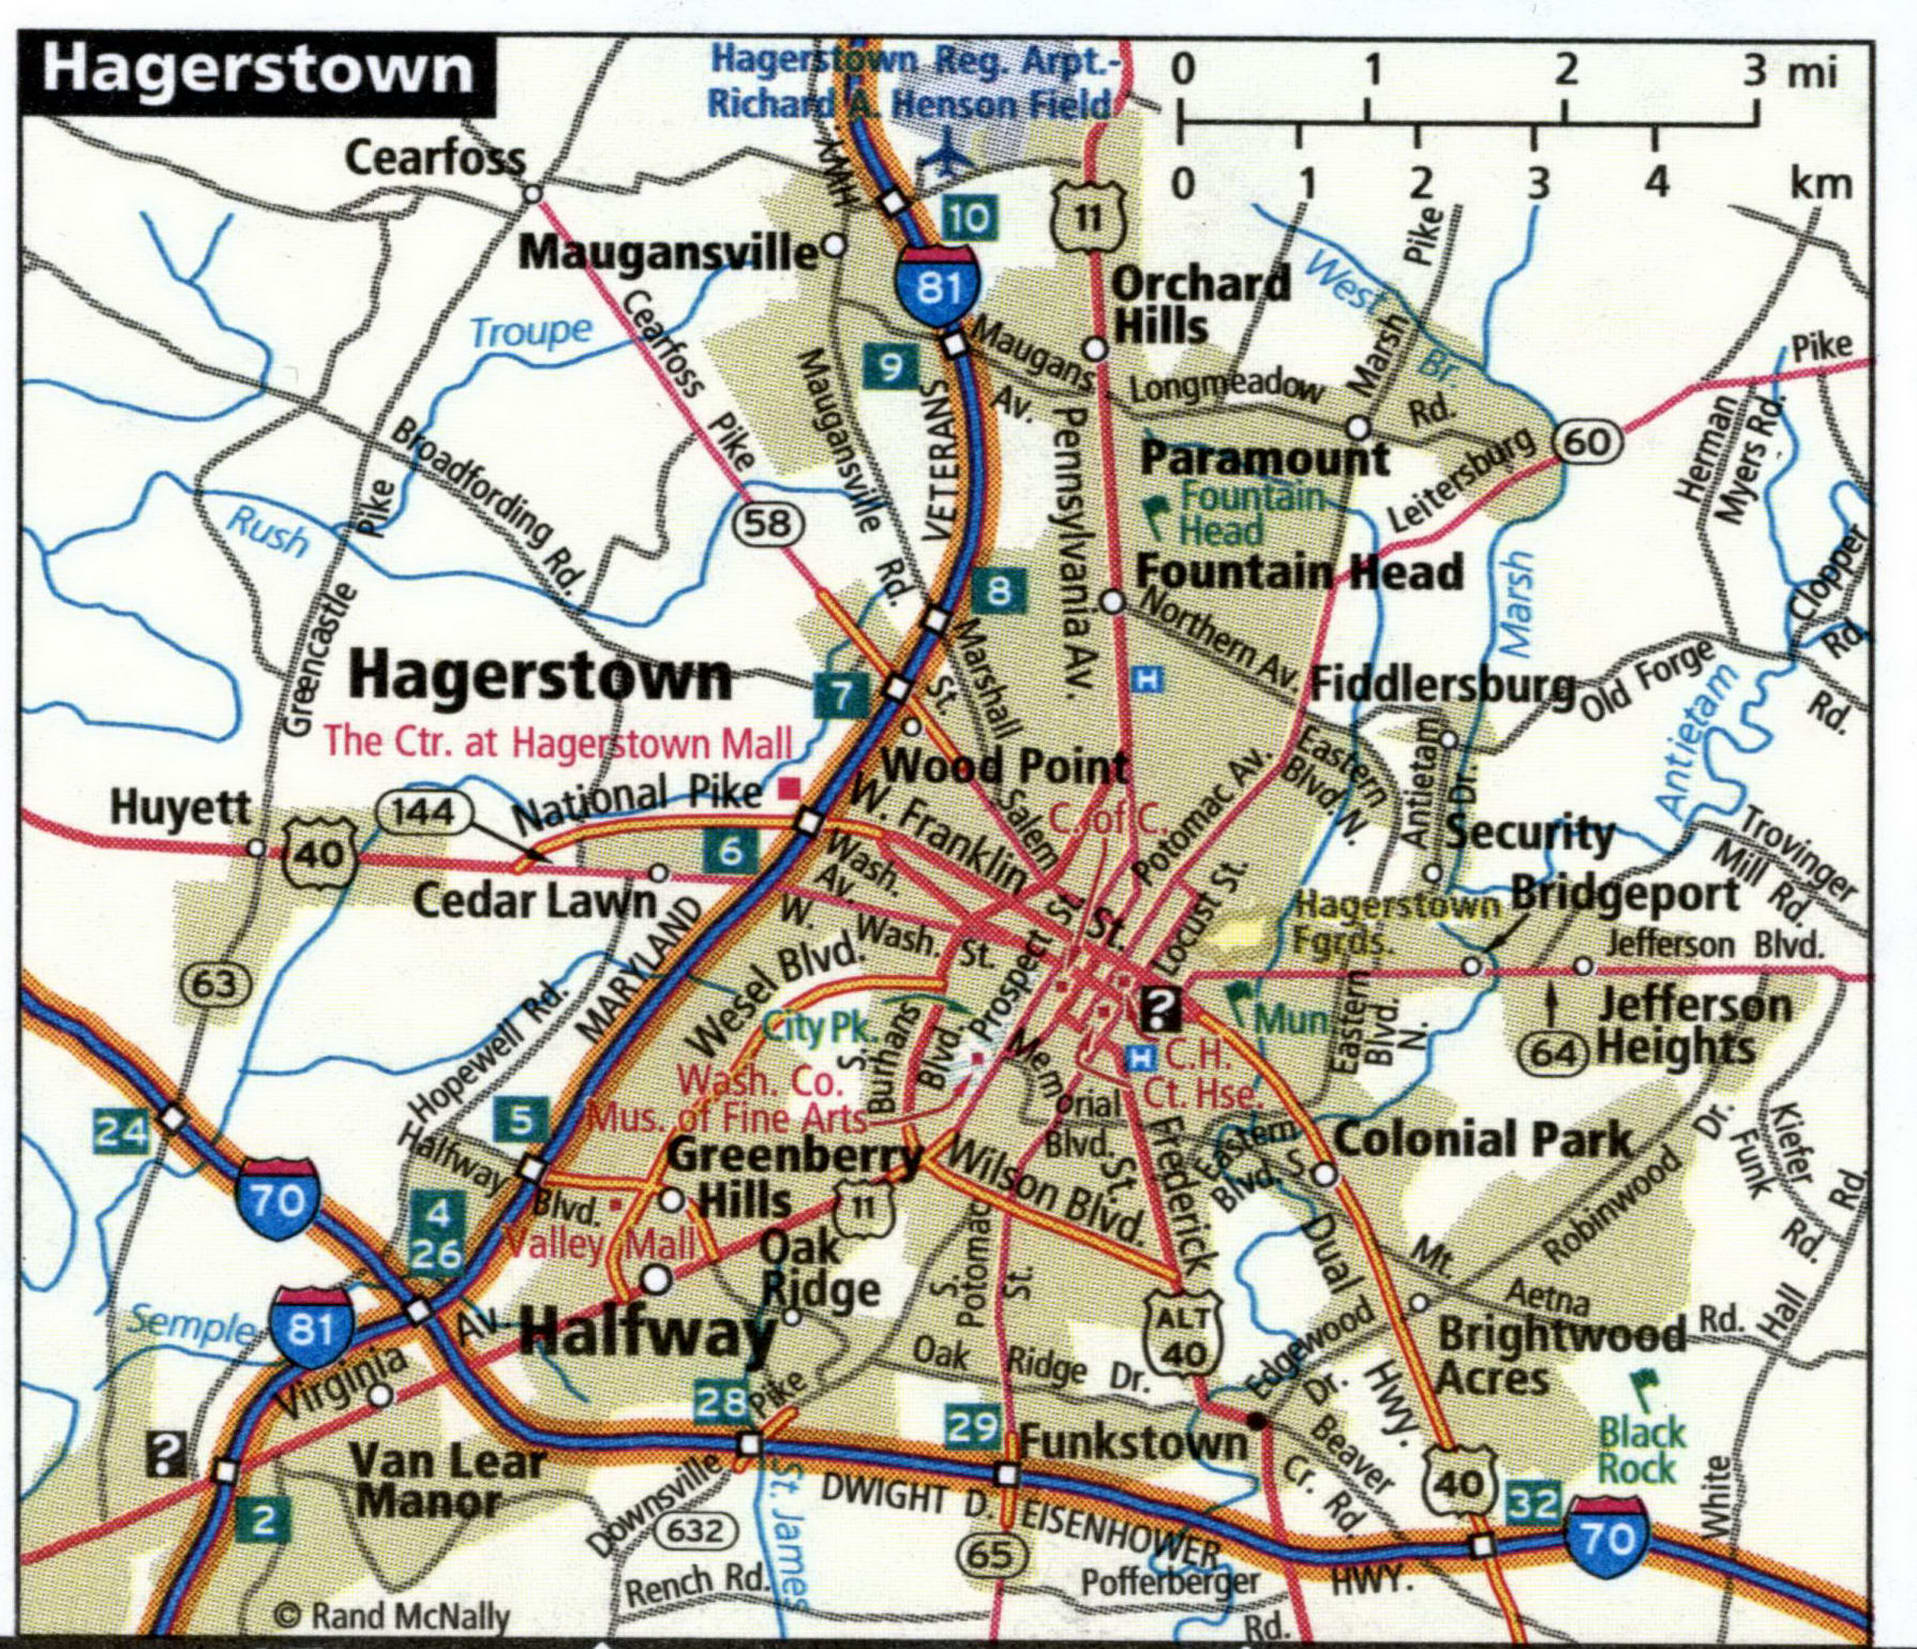 Hagerstown map for truckers